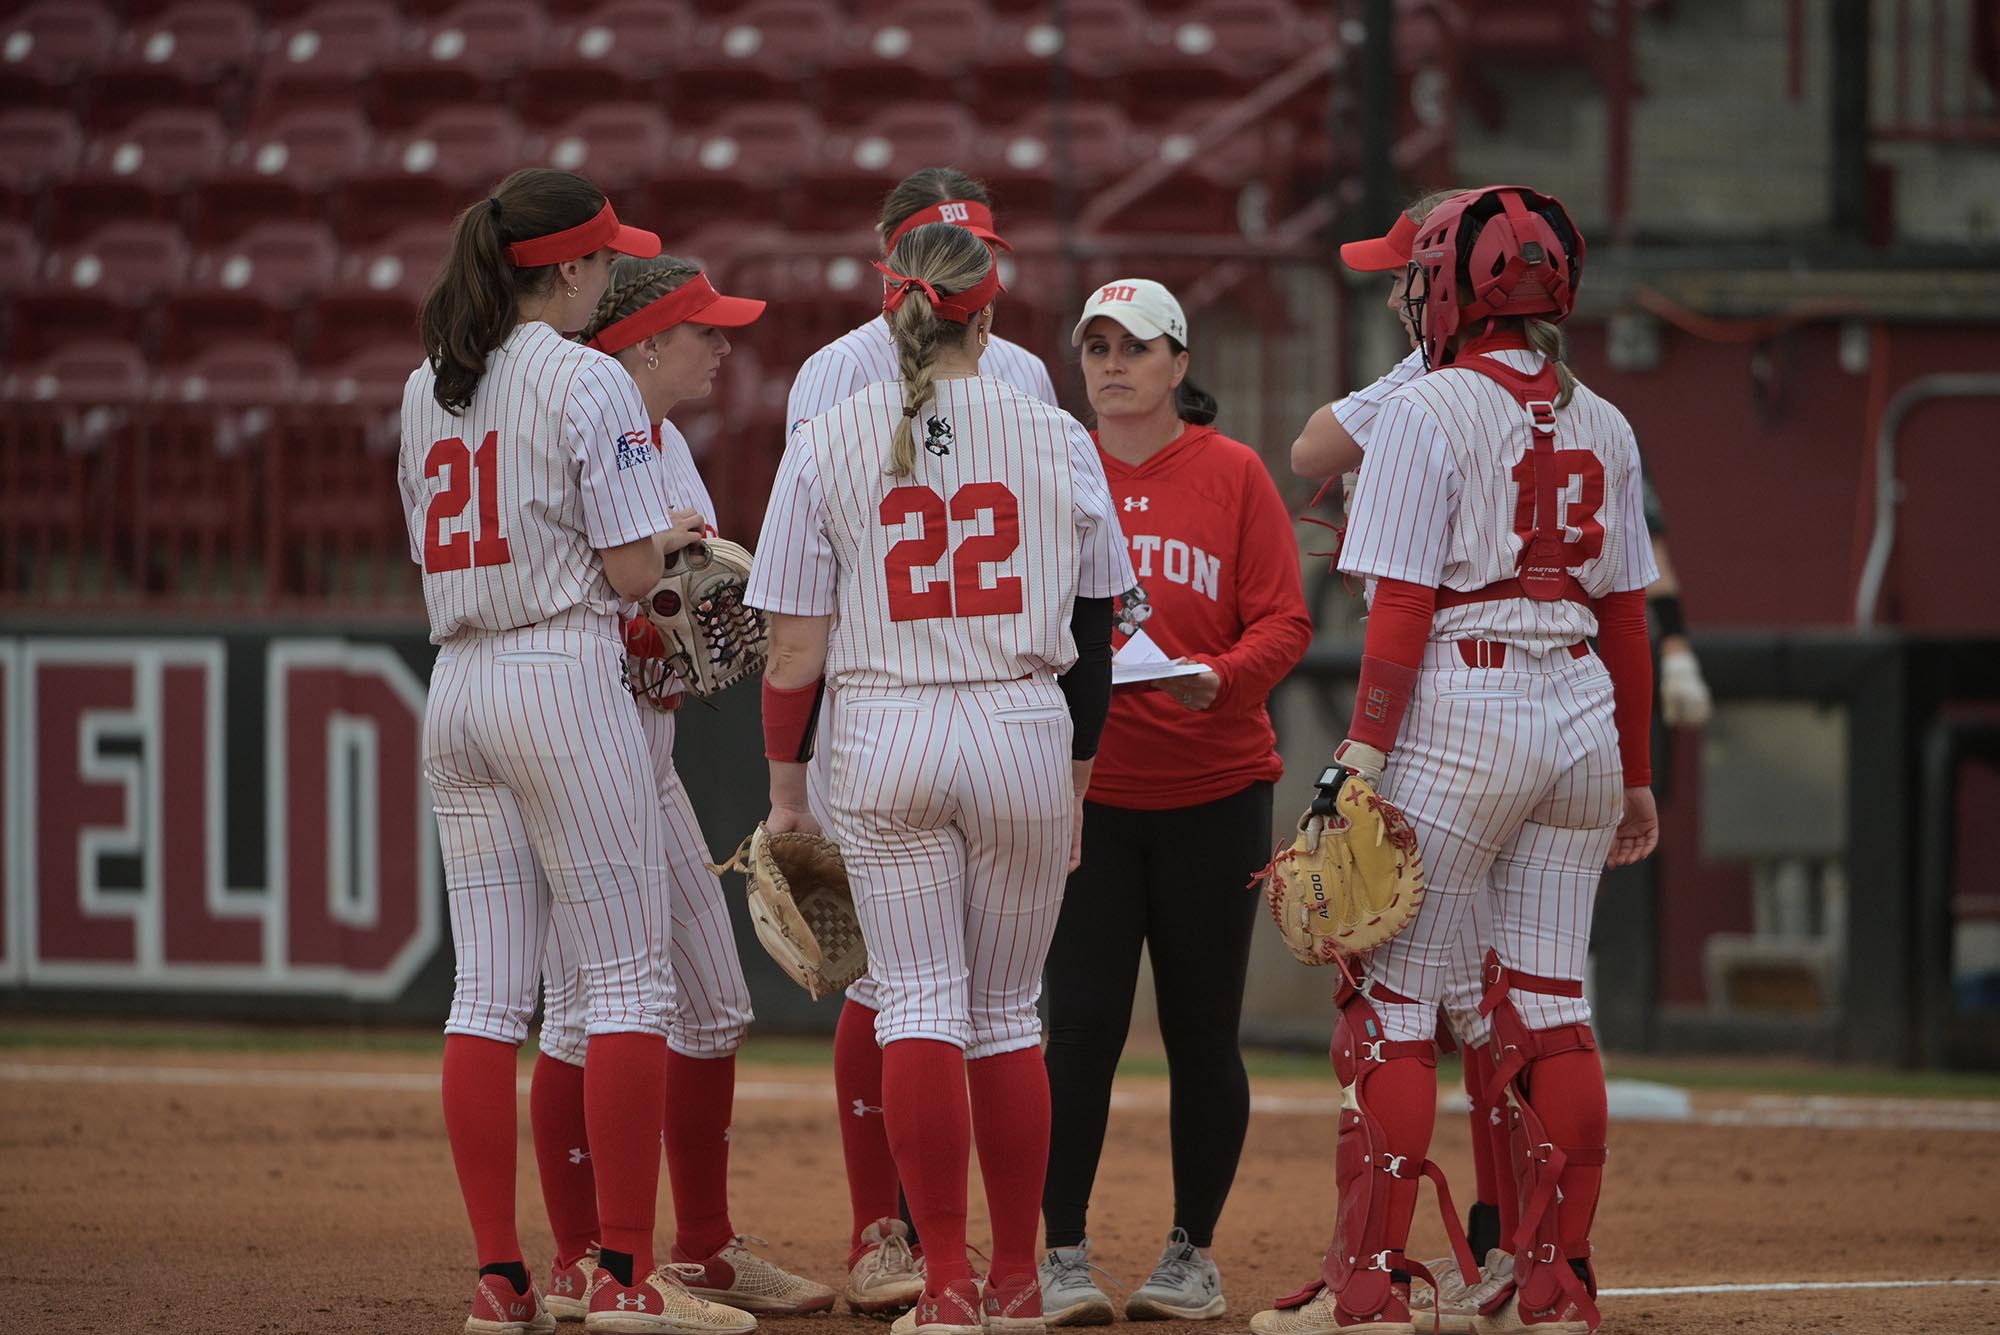 Photo: Ashley Waters, a short white woman with her team. They surround her as she gives advice close to the dugout.